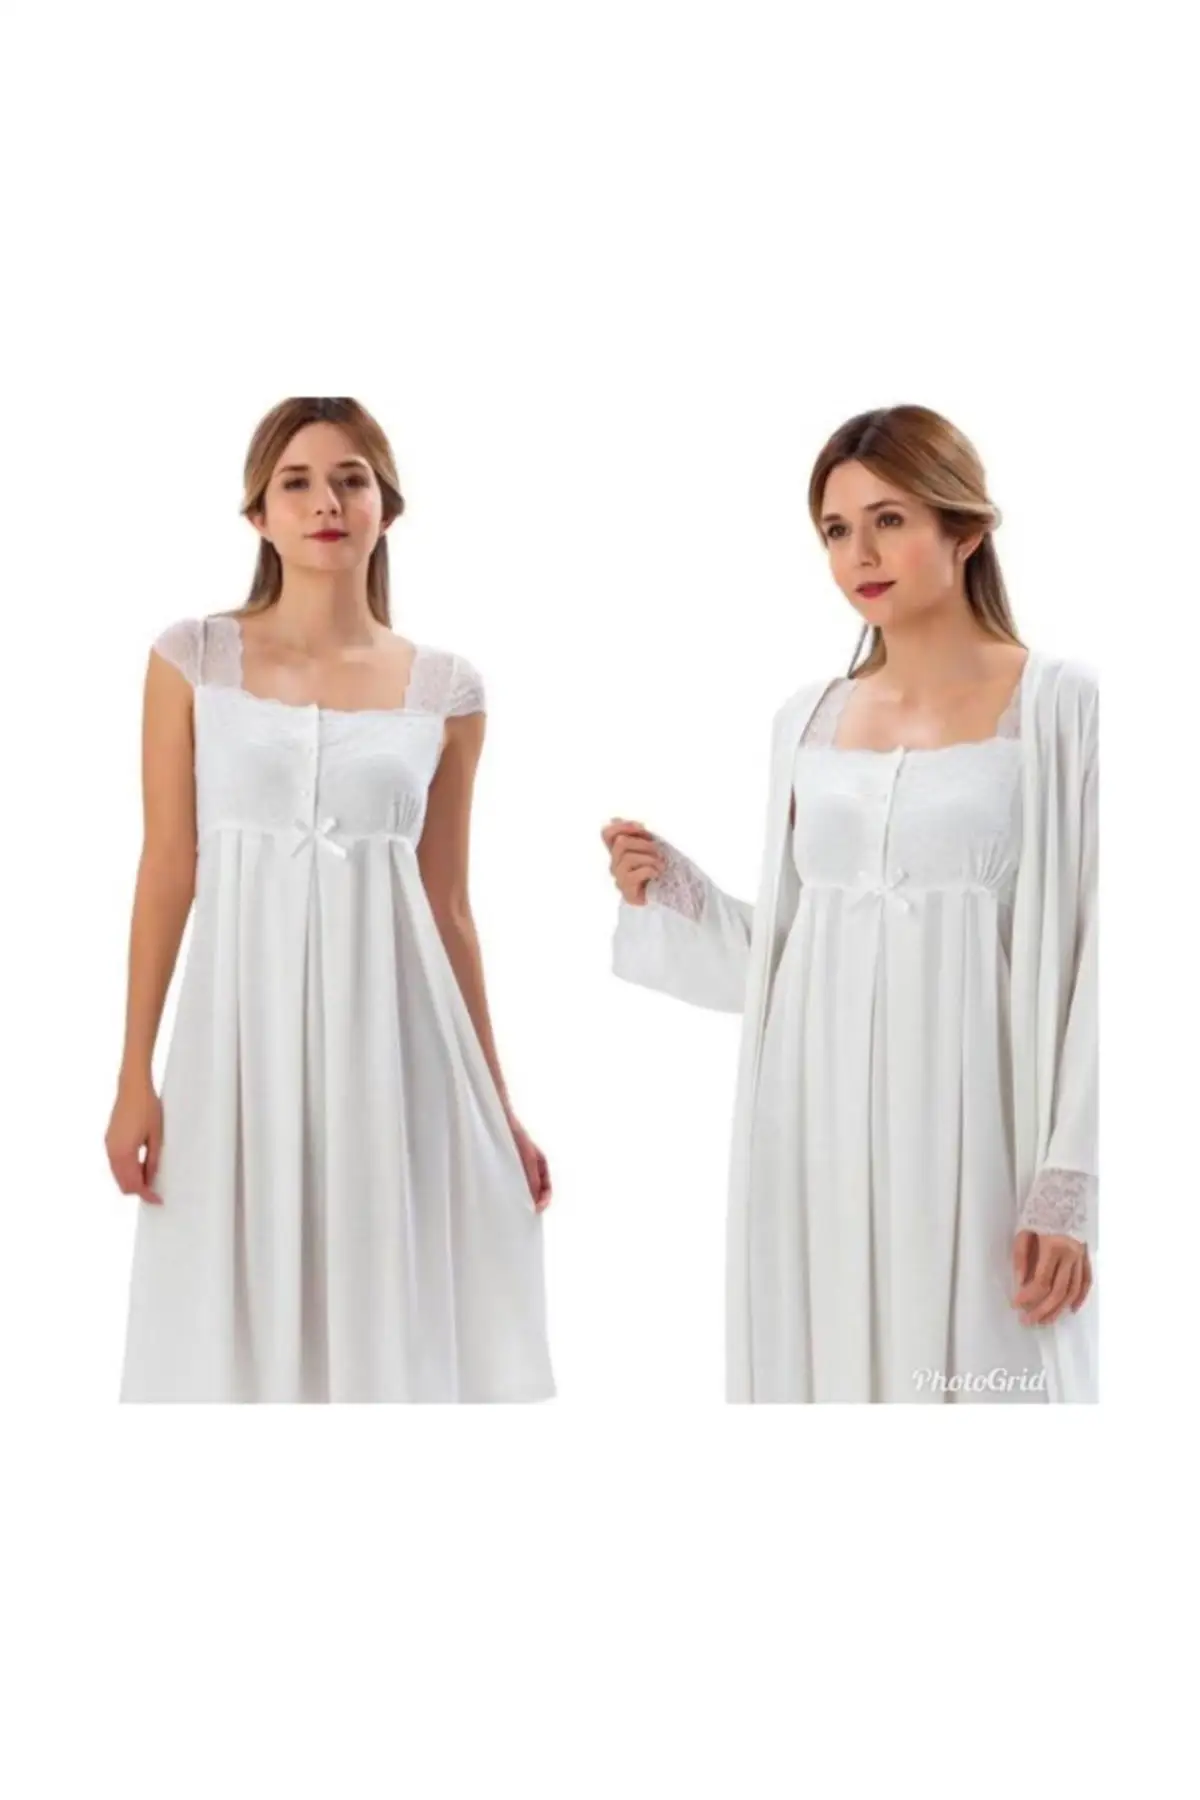 2200 maternity Puerperal Nightgown Dressing Gown Team